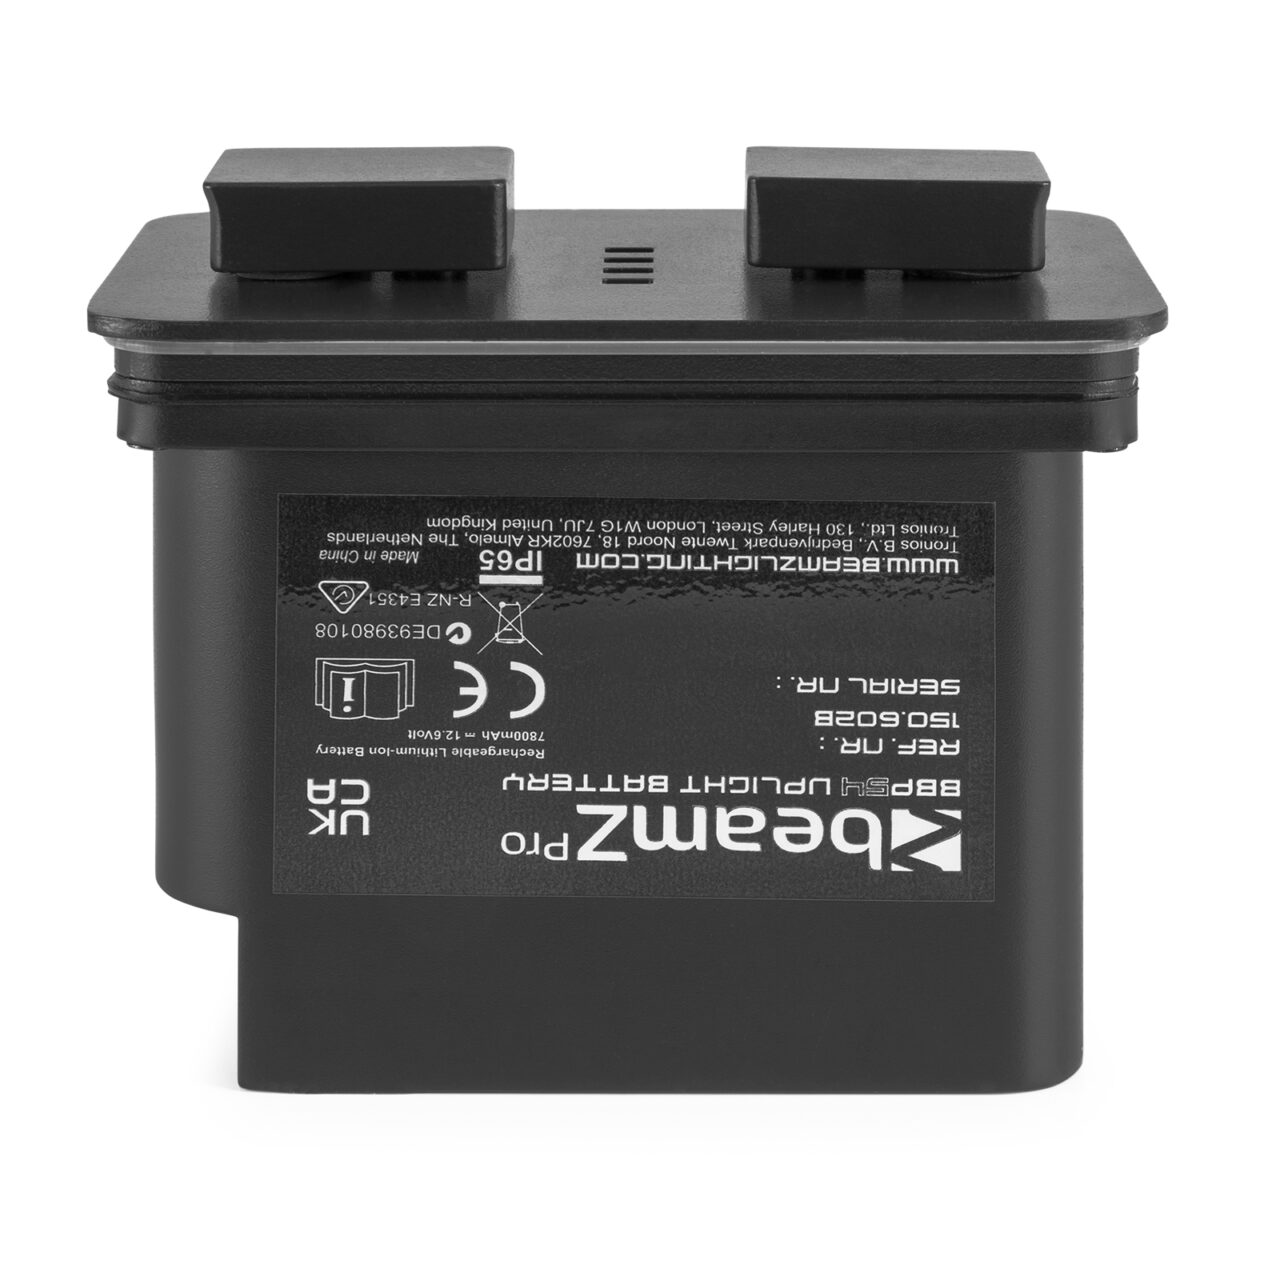 BBP5XB REPLACEMENT BATTERY PACK beamZ Pro